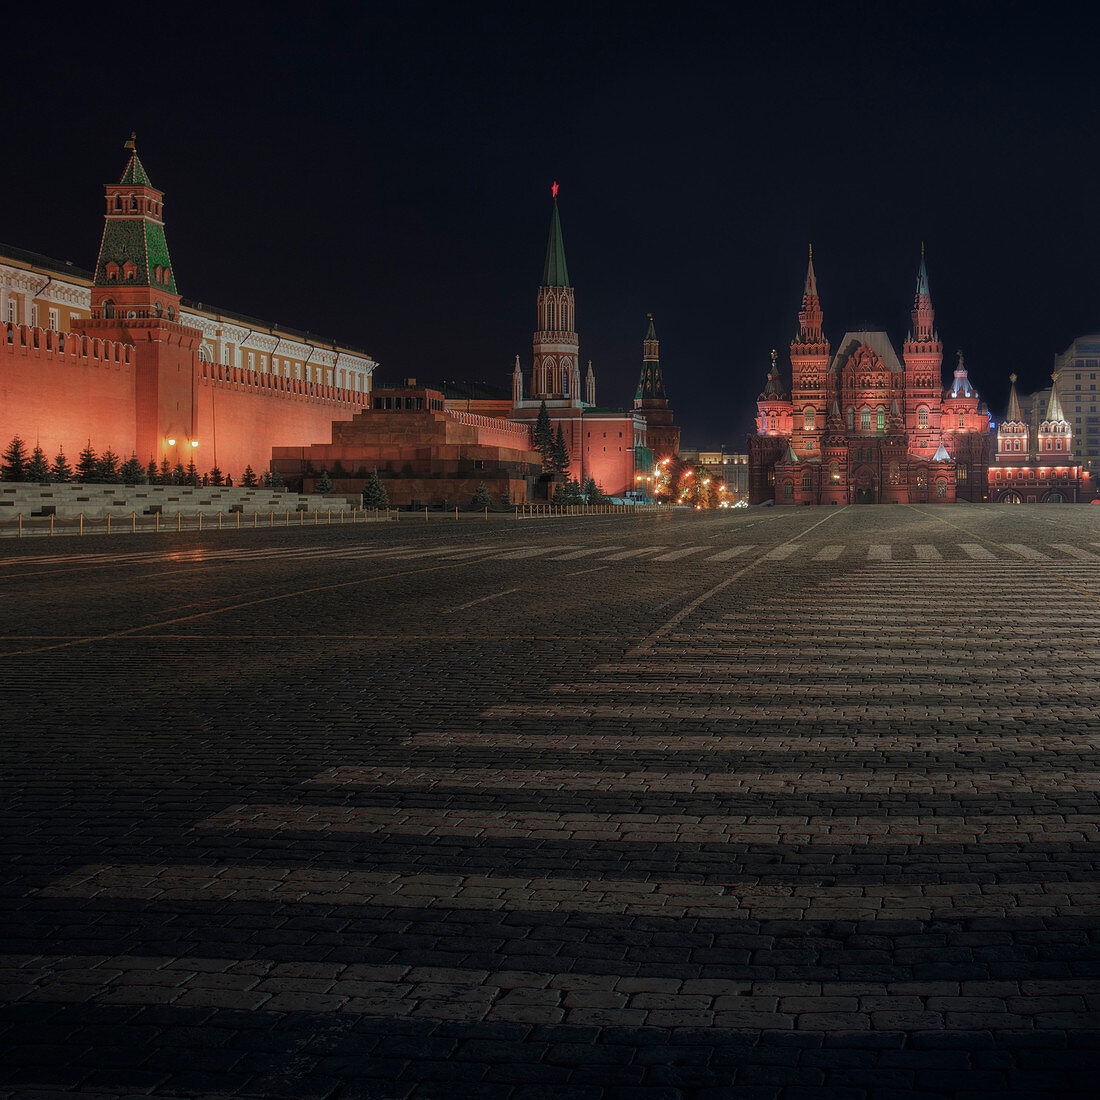 Red Square, Lenin's tomb, and Kremlin, Moscow, Russia